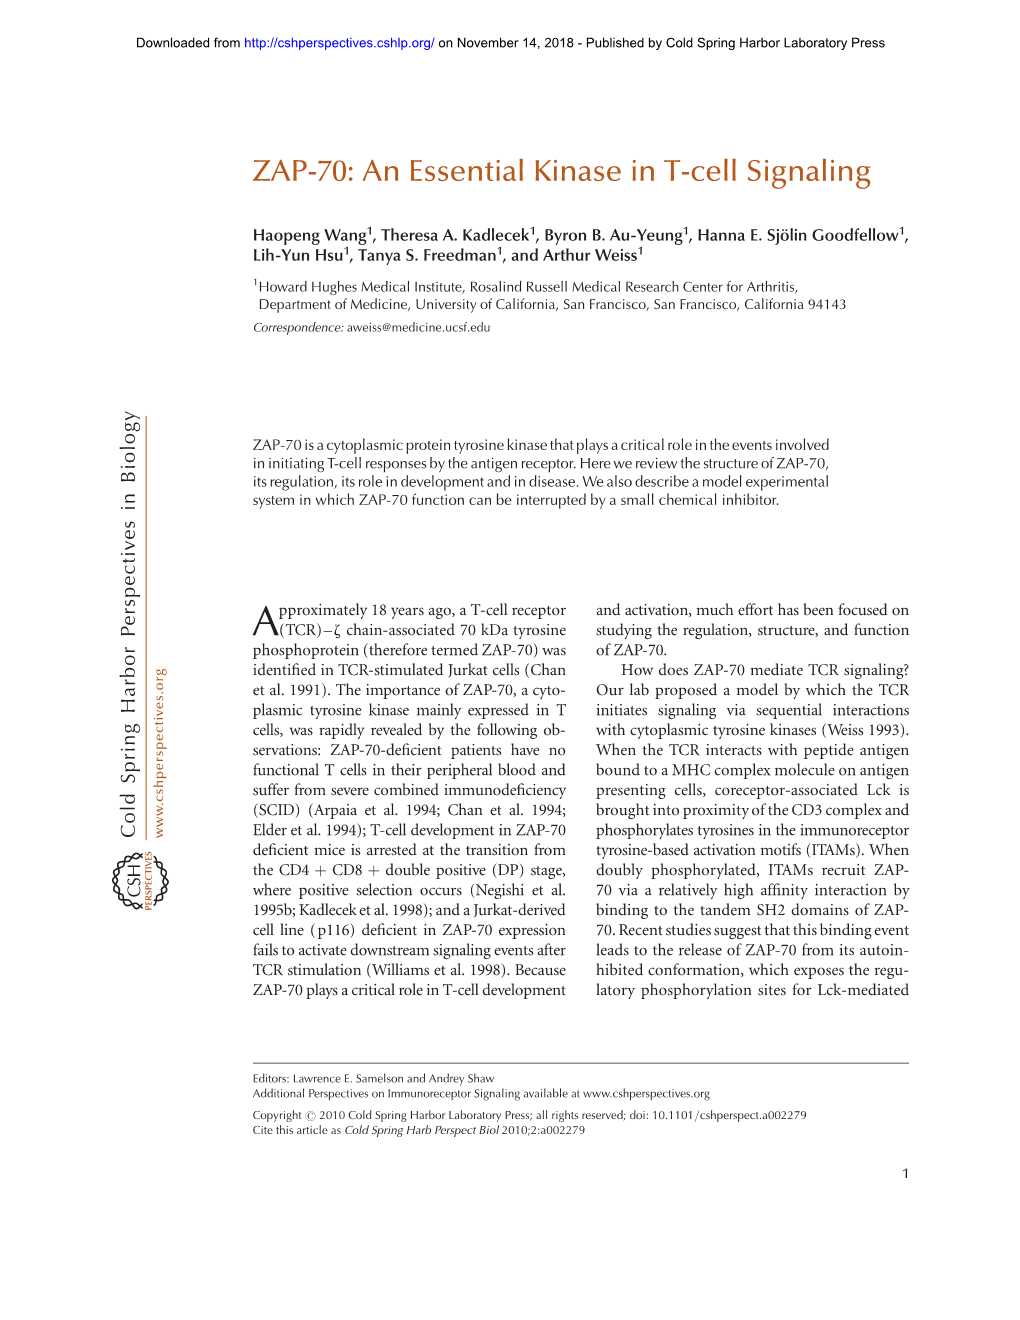 ZAP-70: an Essential Kinase in T-Cell Signaling